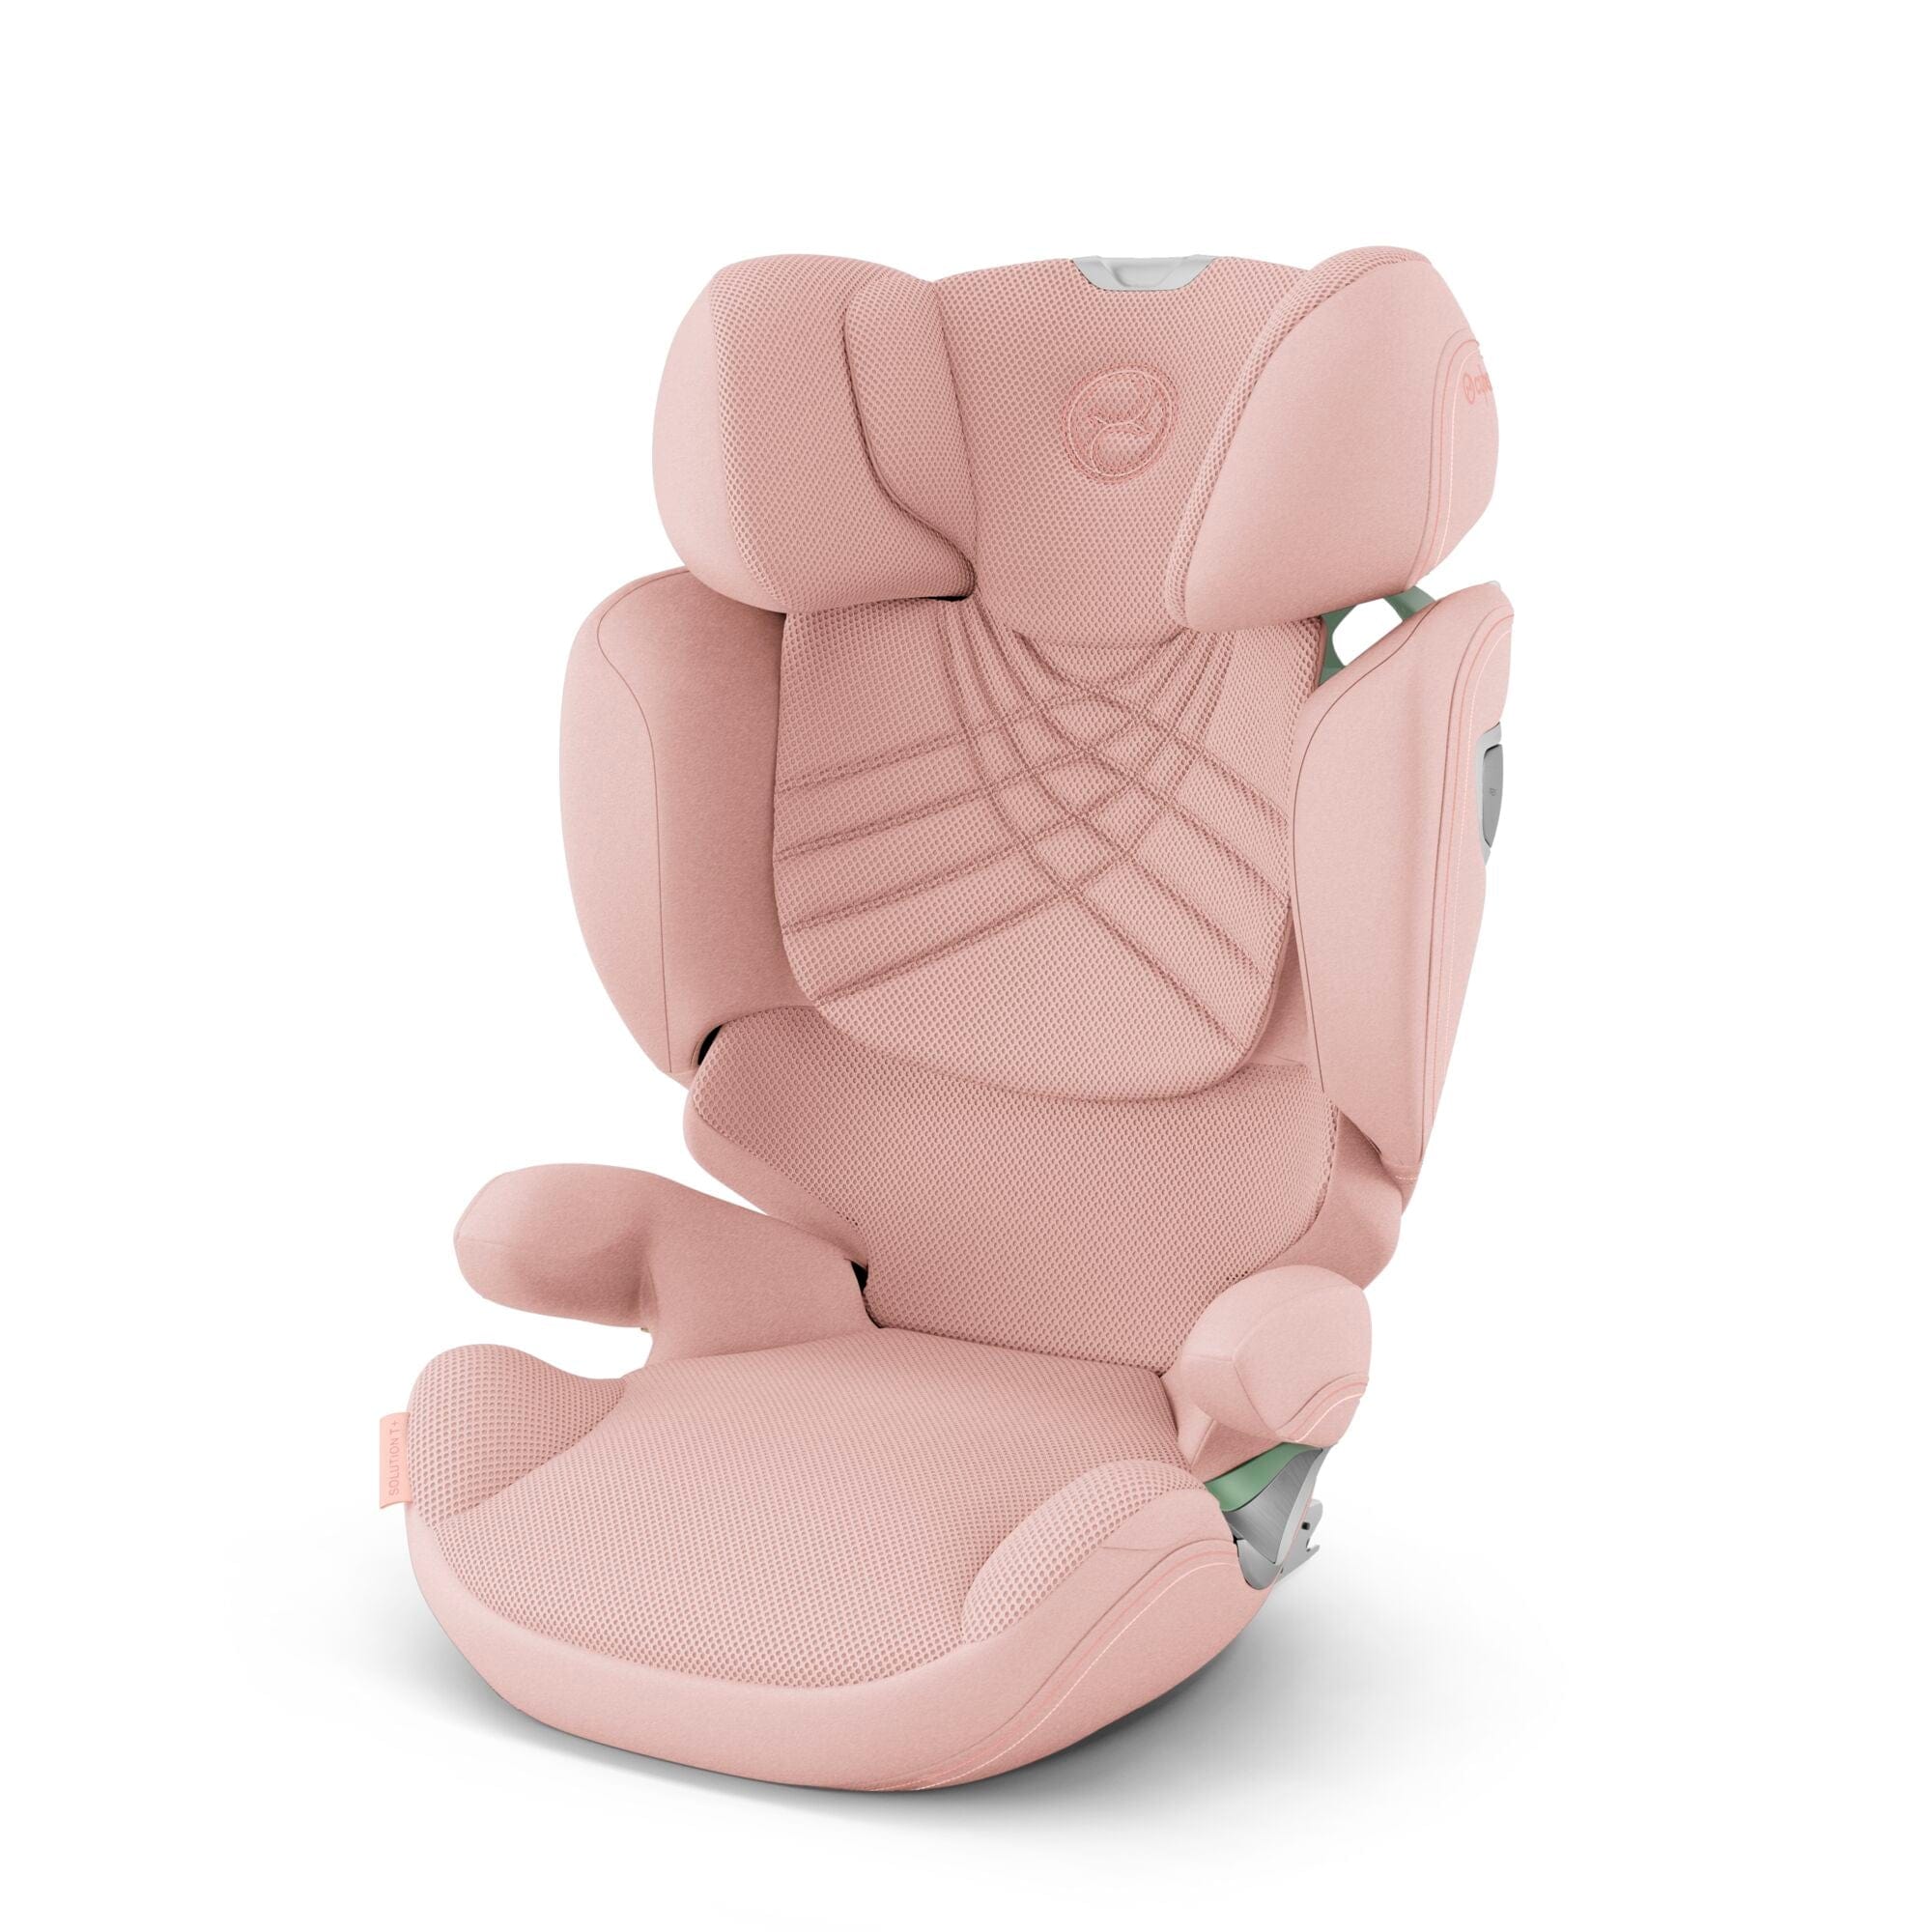 Cybex Solution T i-Fix Plus in Peach Pink Highback Booster Seats 522004112 4063846380350